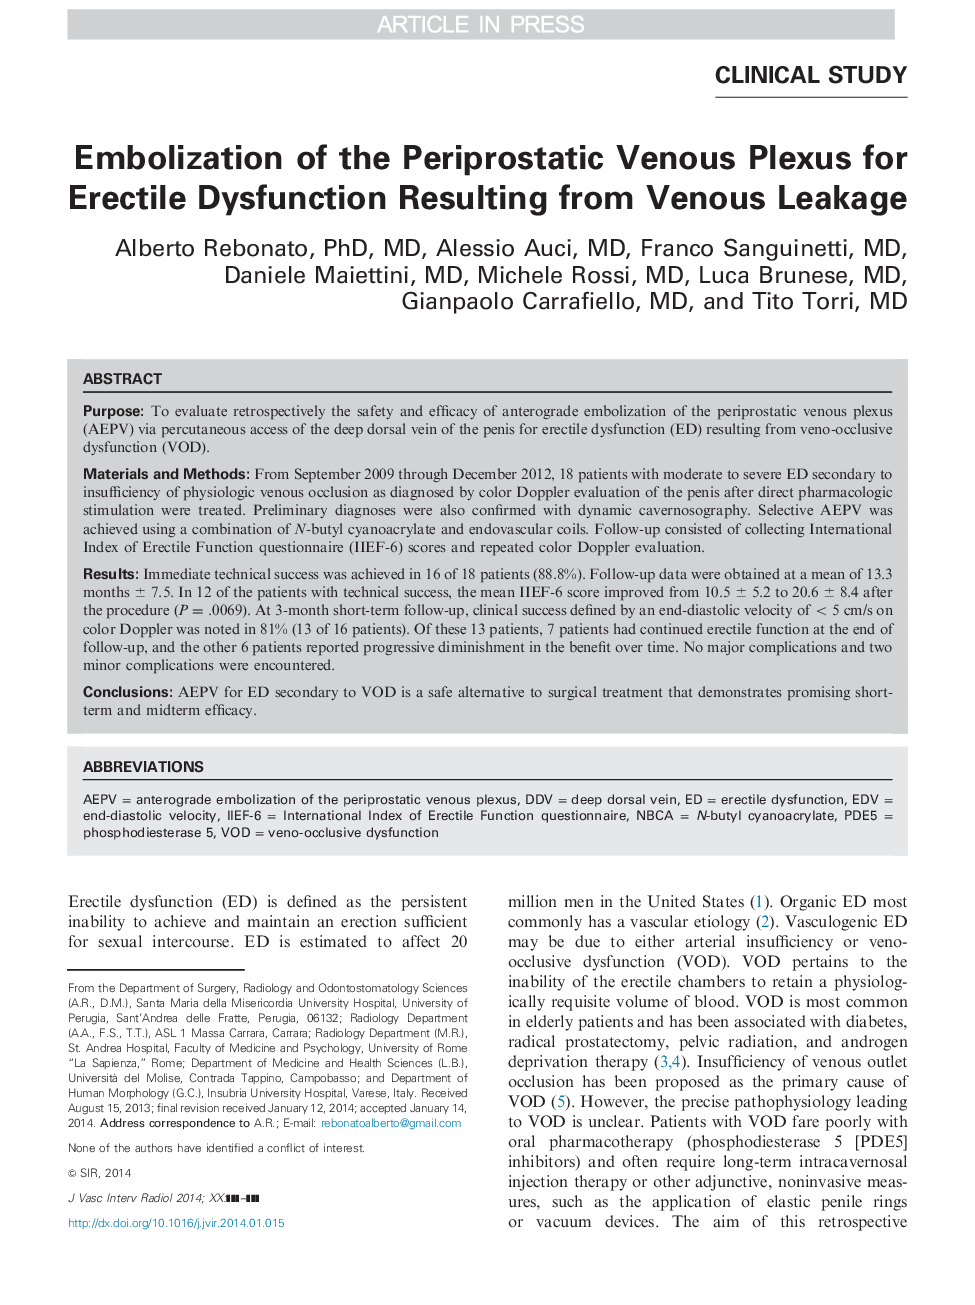 Embolization of the Periprostatic Venous Plexus for Erectile Dysfunction Resulting from Venous Leakage